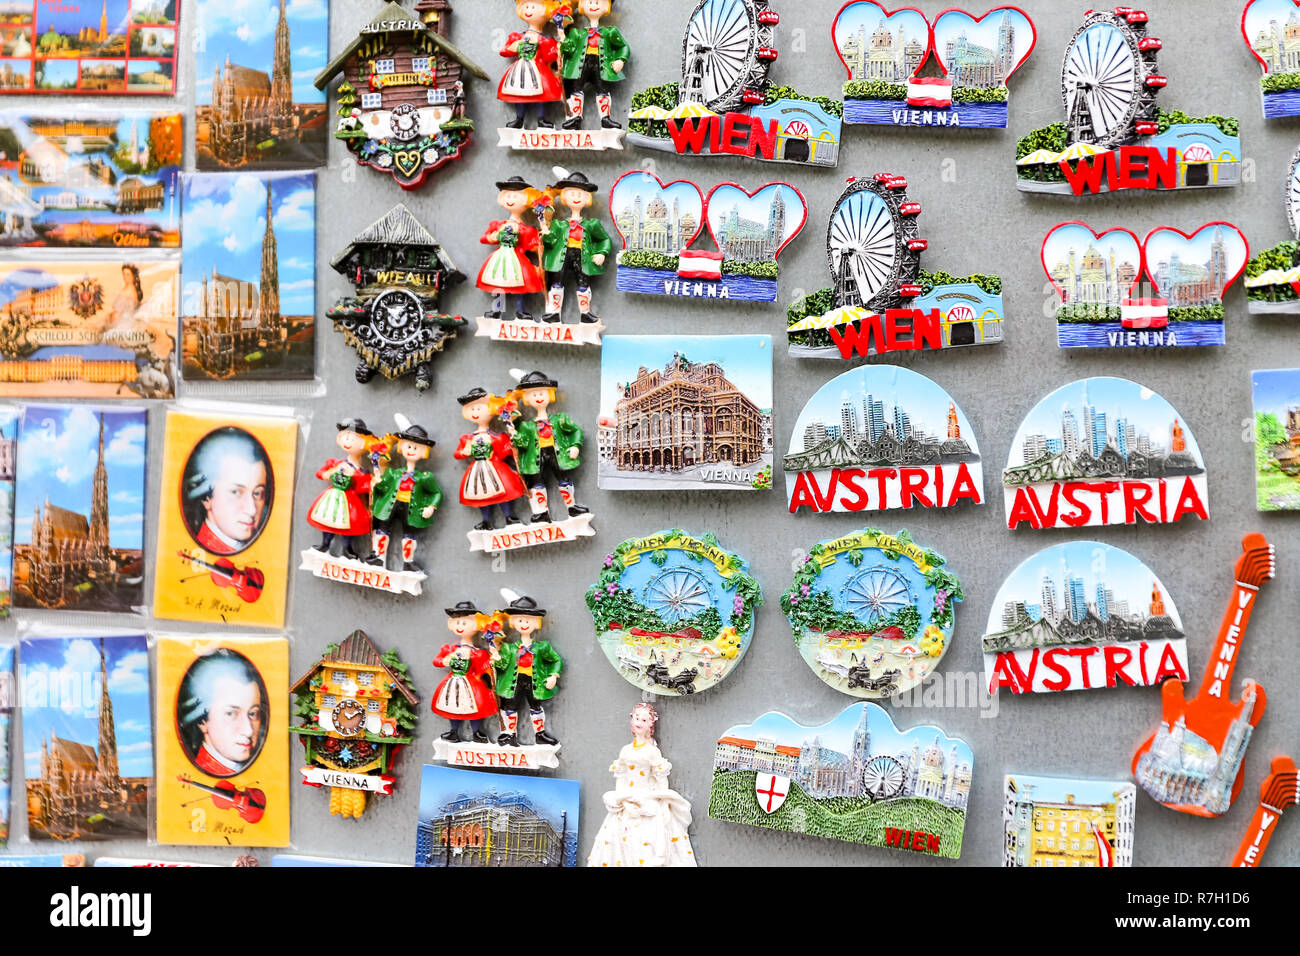 Magnets in a Shop, Vienna City, Austria Stock Photo - Alamy